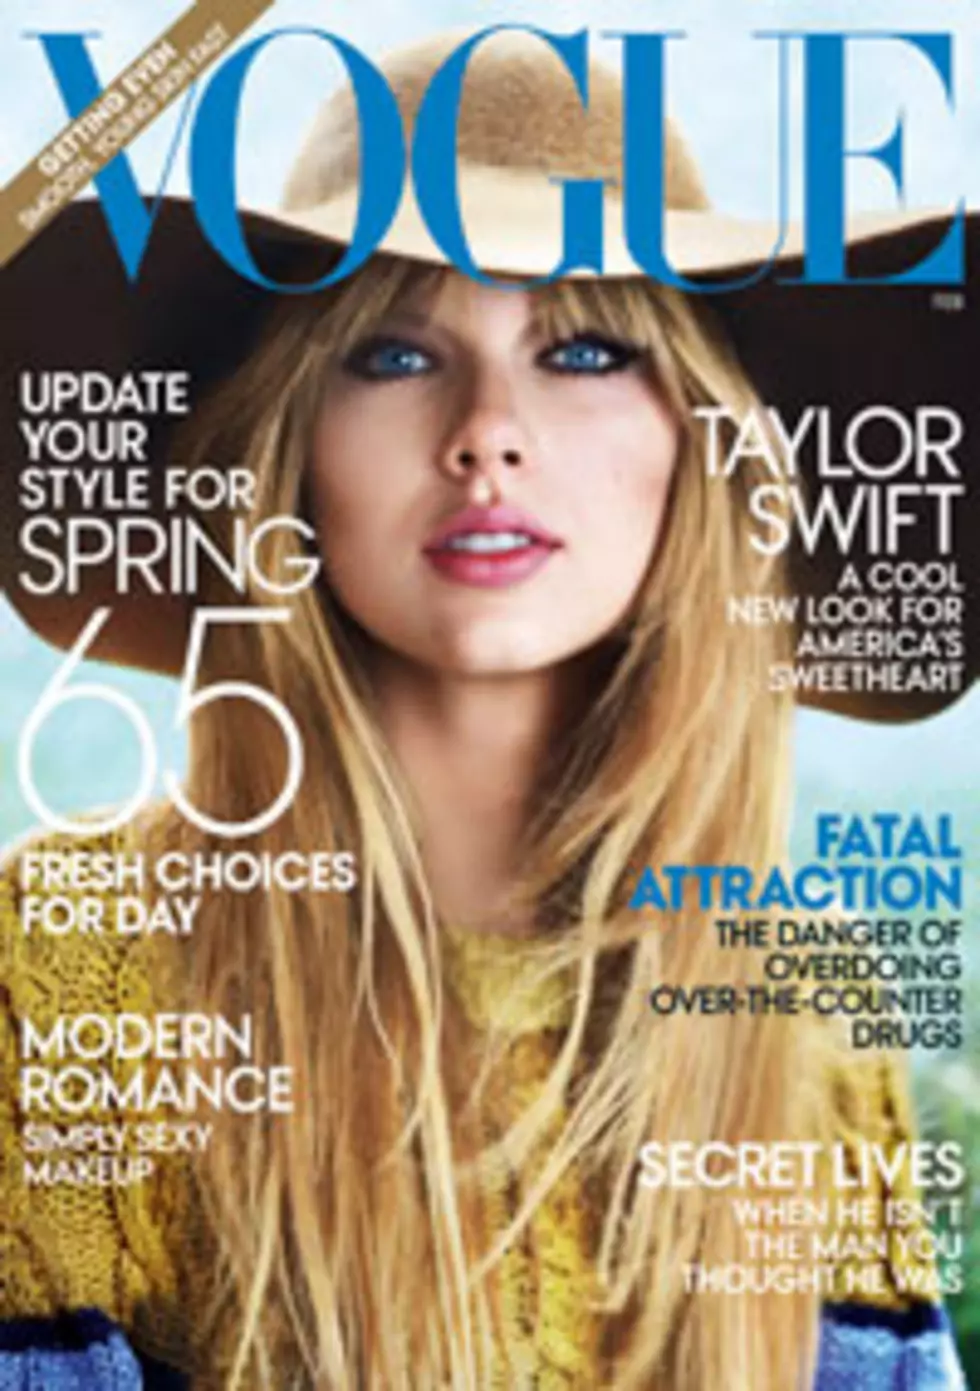 Taylor Swift Takes Vogue Readers Behind the Scenes